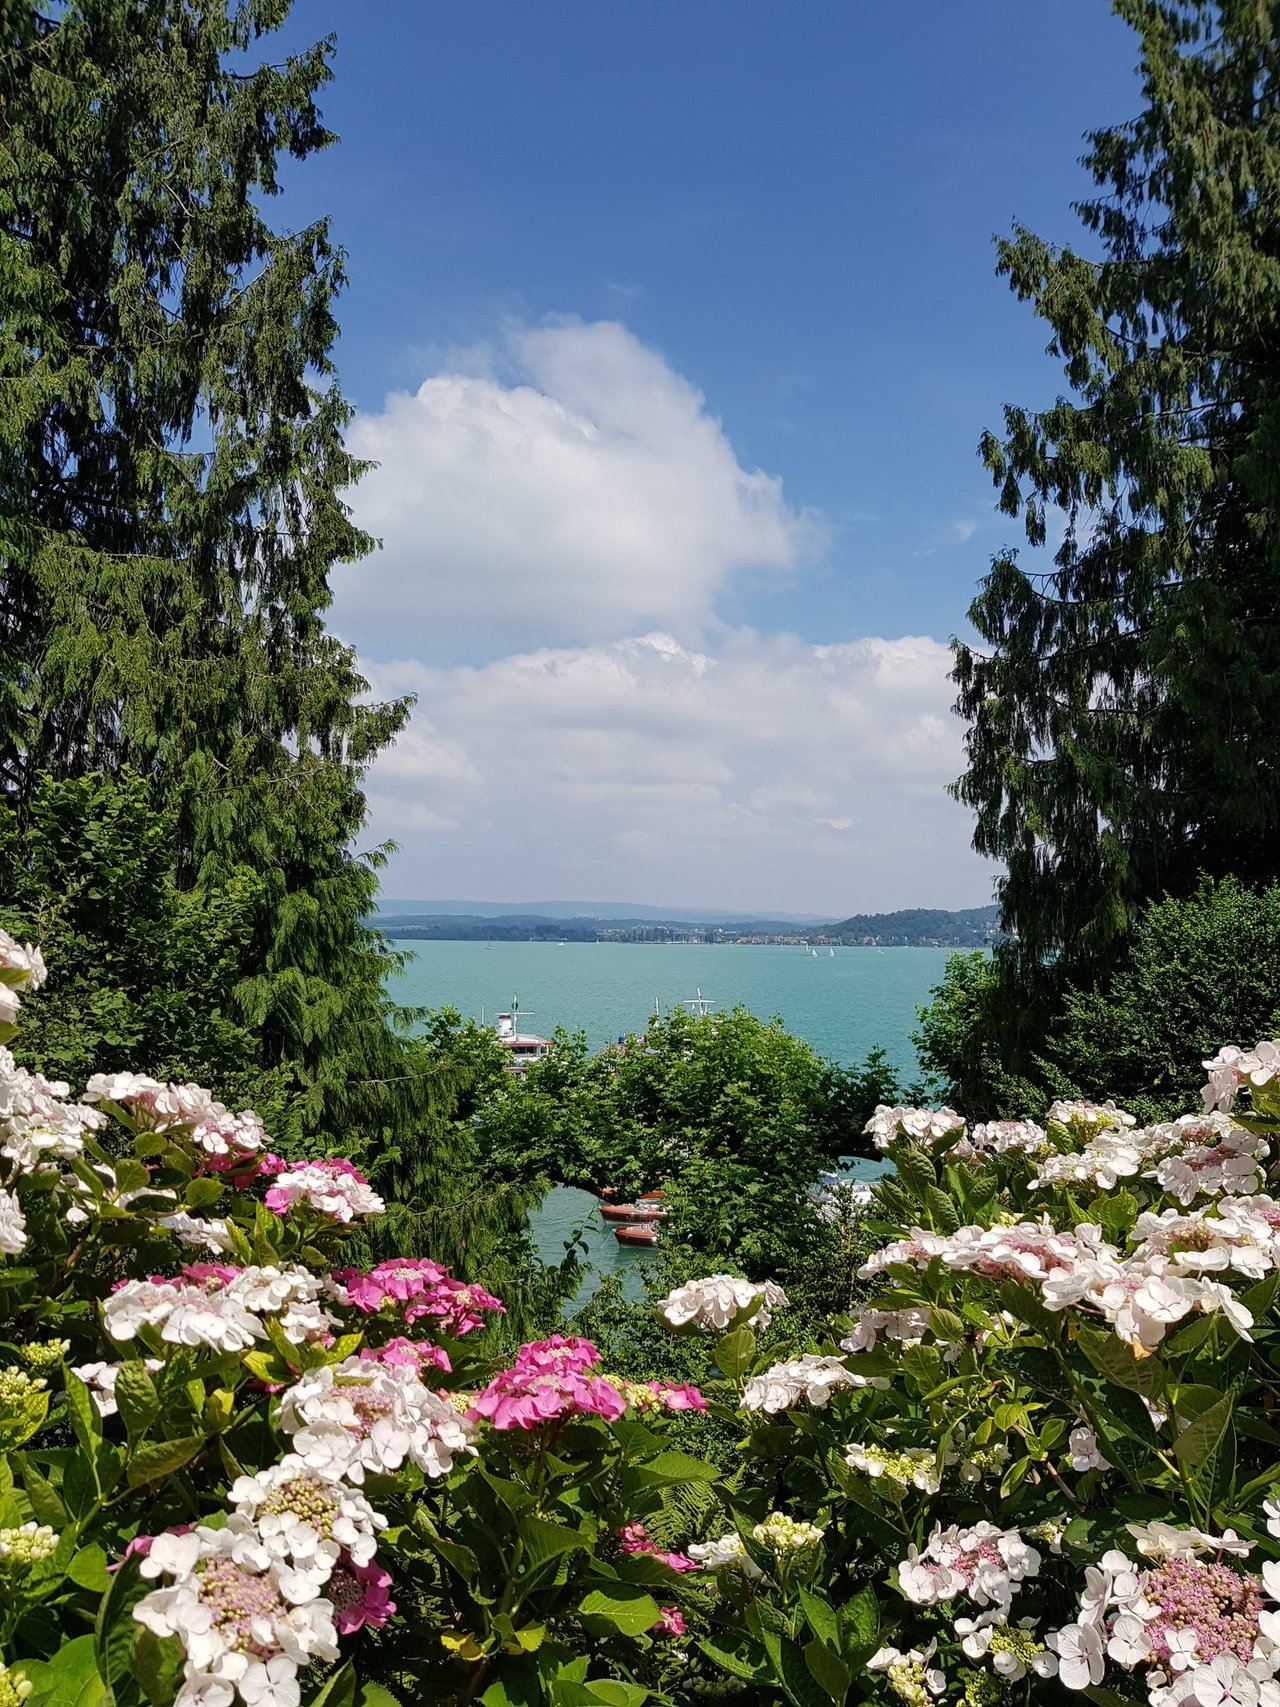 Had an amazing time yesterday in the boat and #Mainau island. And today saying goodbye to beautiful #Lindau Thank you, #LINO18 organizers @lindaunobel for making this week one of the best of our lives! https://t.co/BvQM3y6zb5